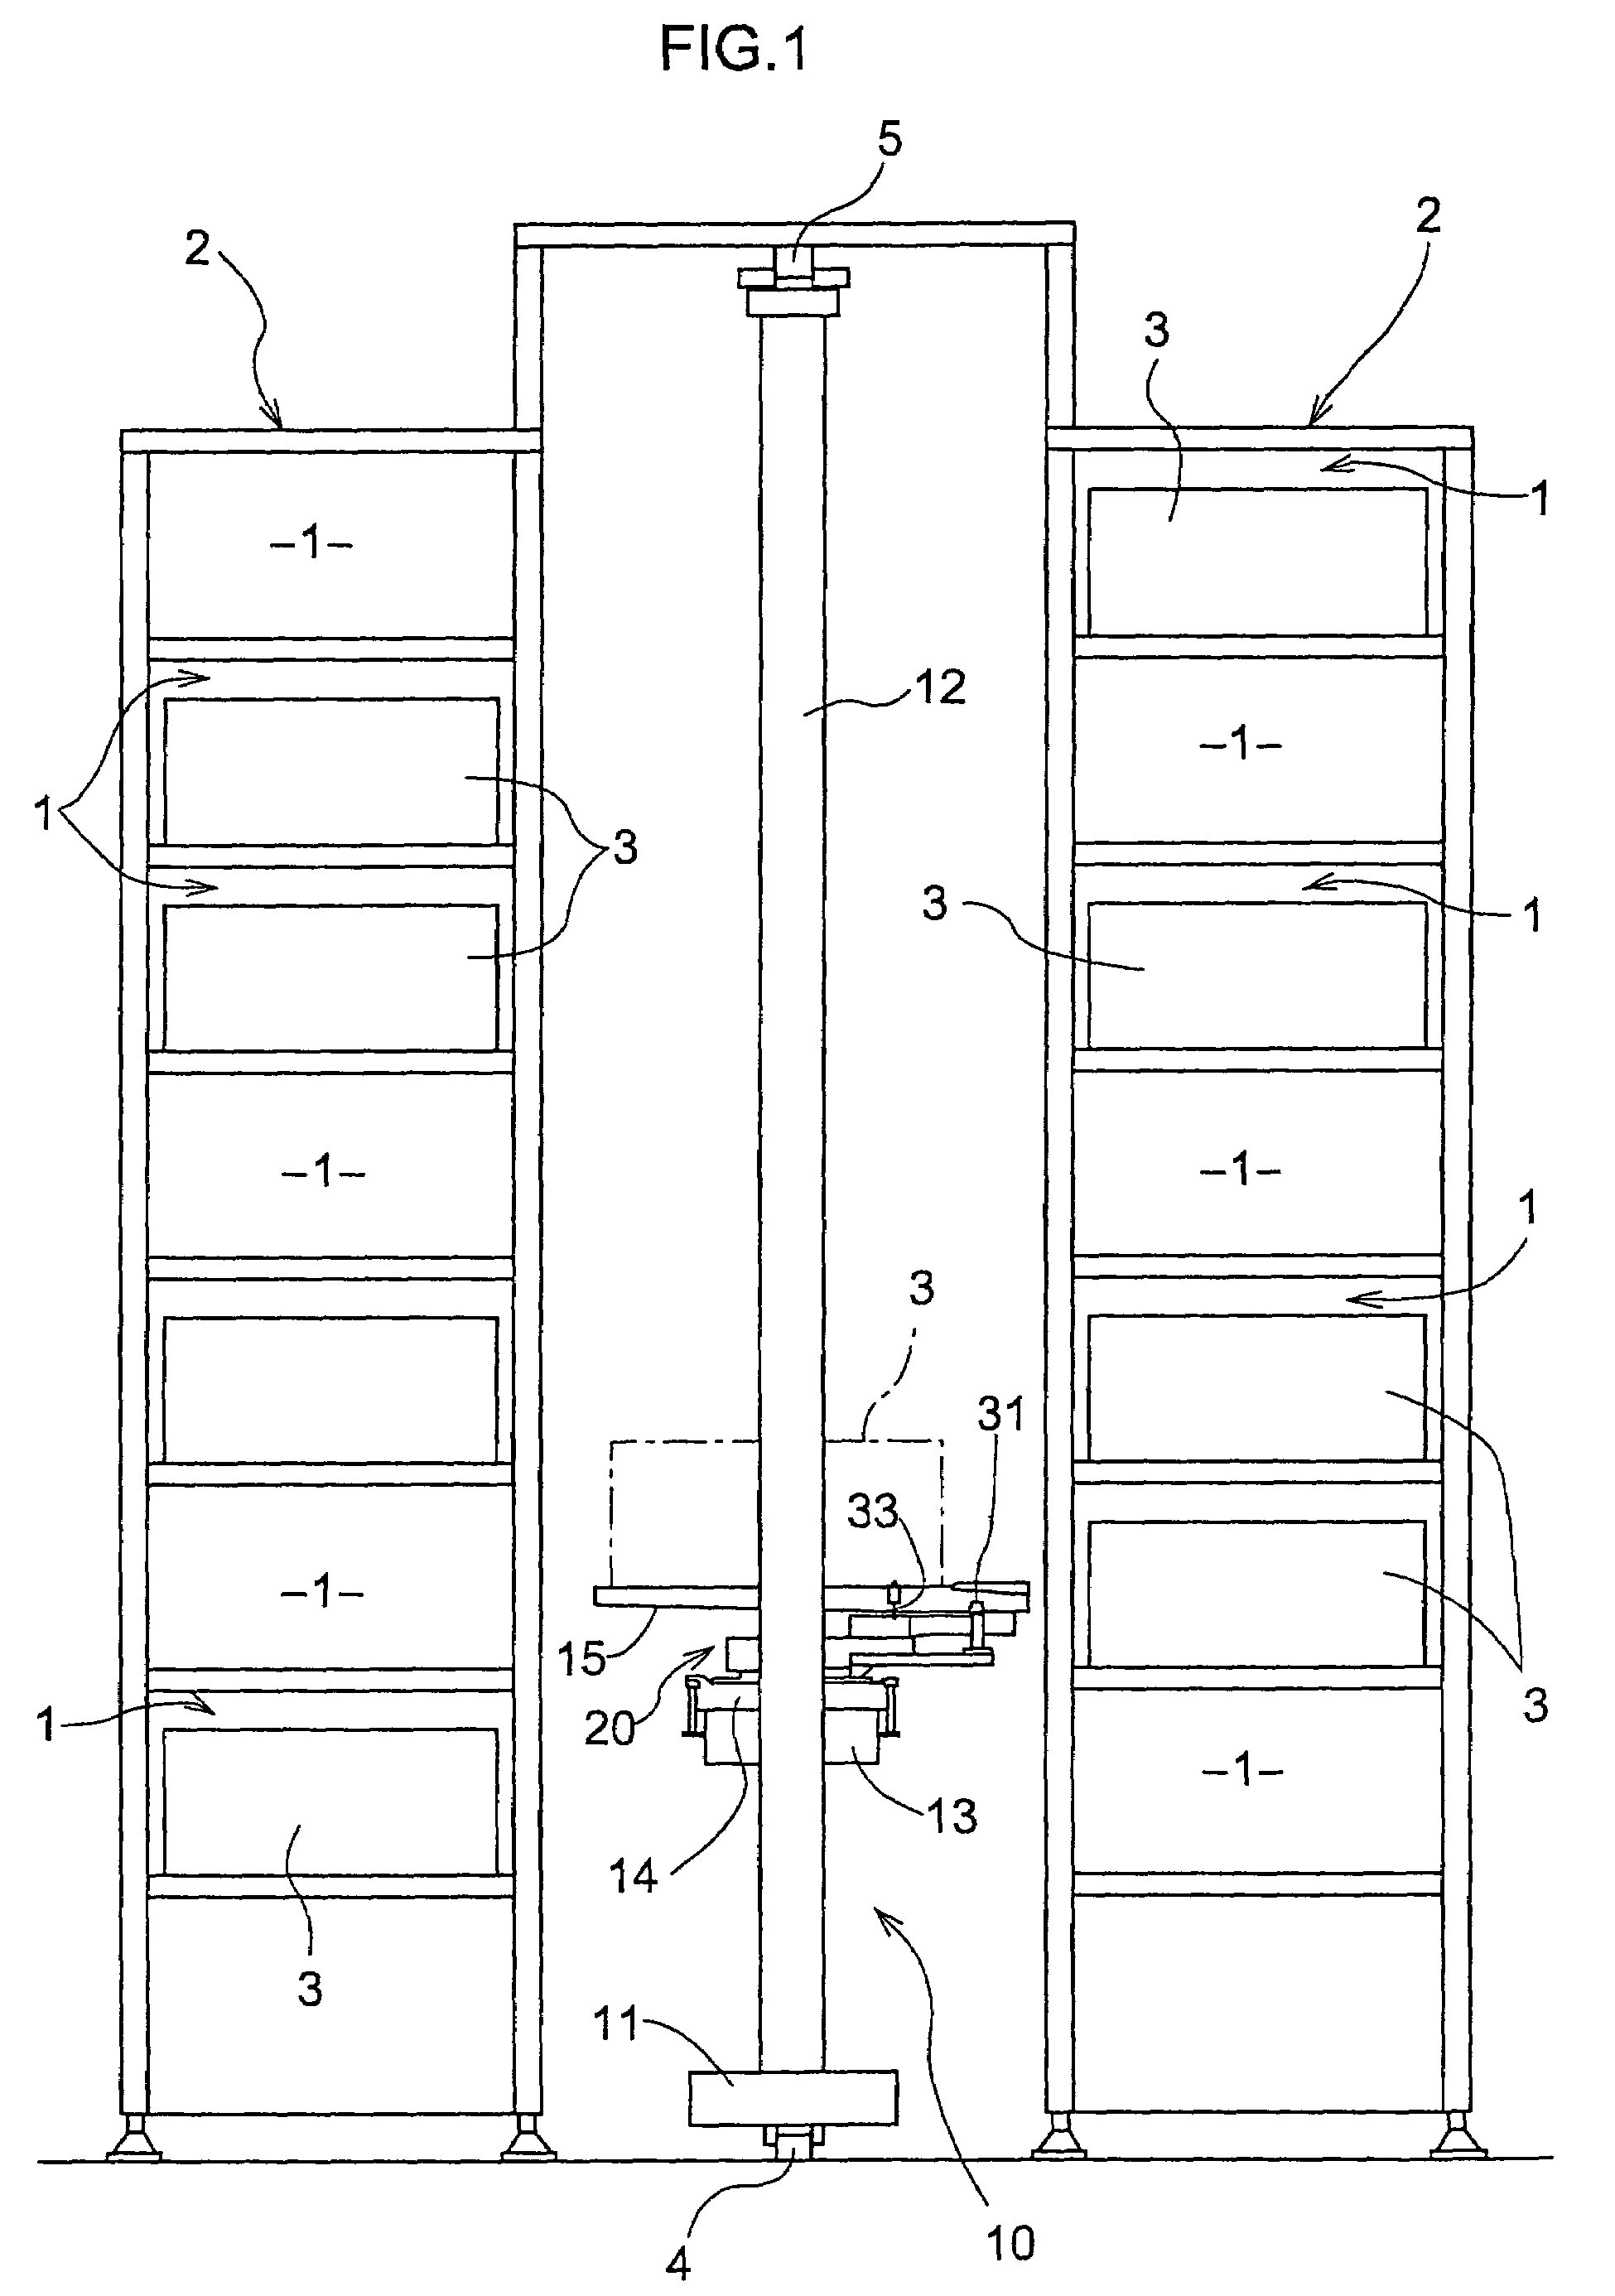 Transporting apparatus with position detection sensor